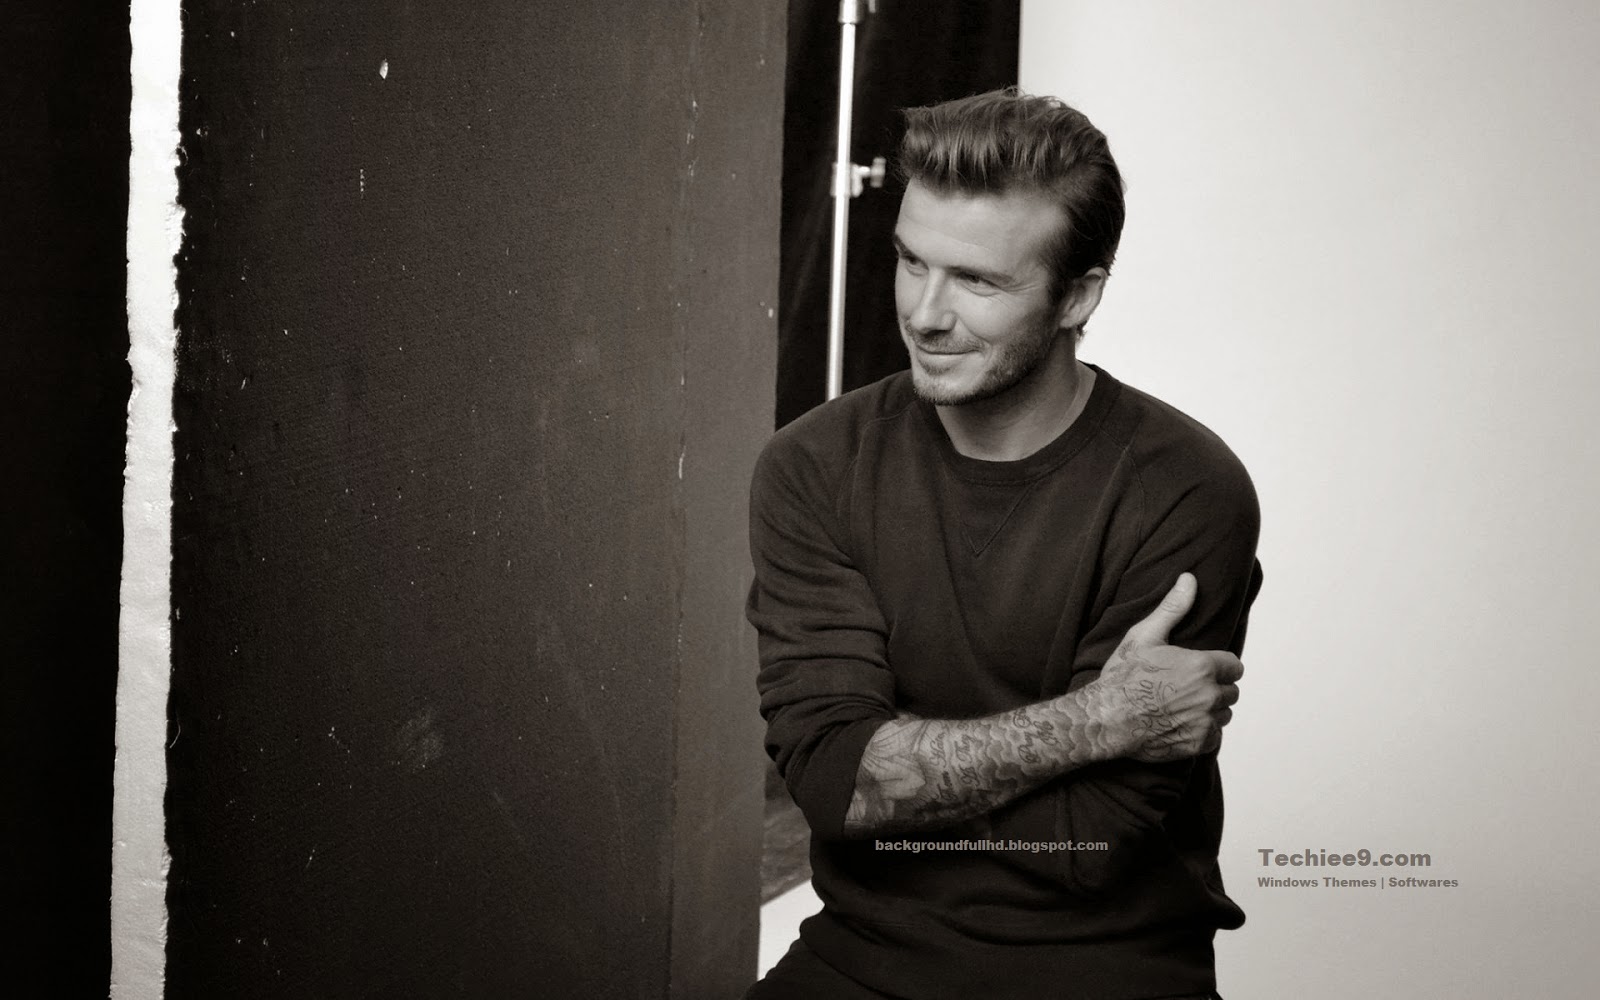 David beckham wallpapers high resolution and quality download